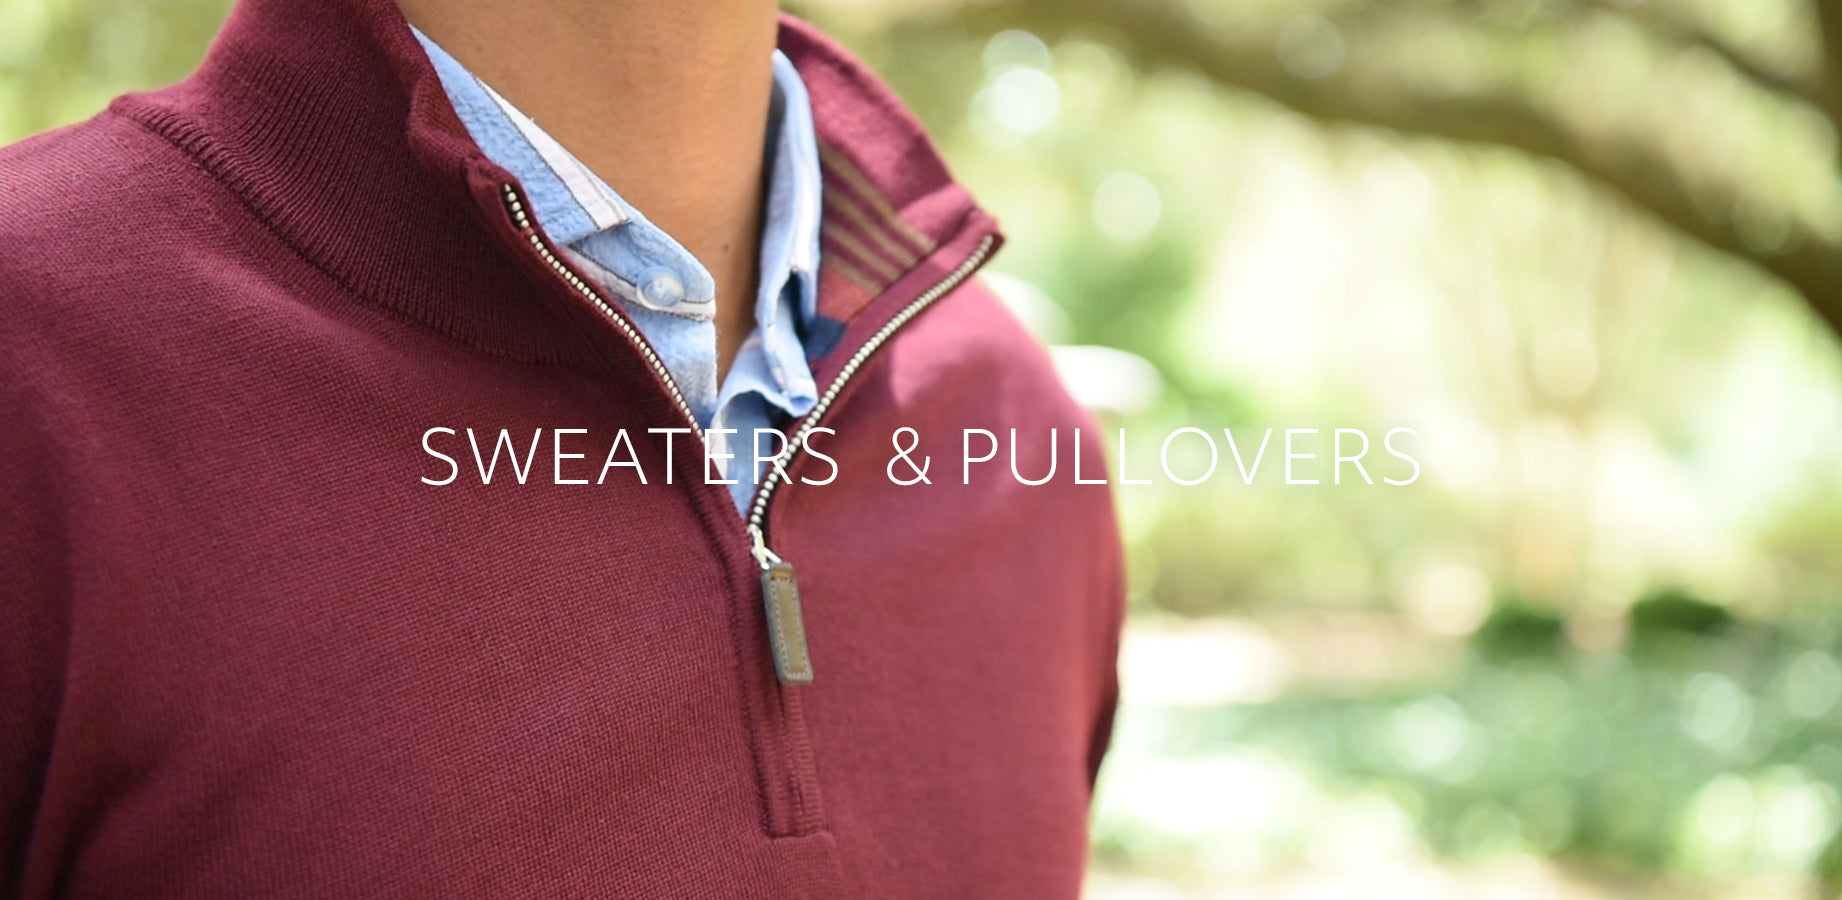 Sweaters & Pullovers